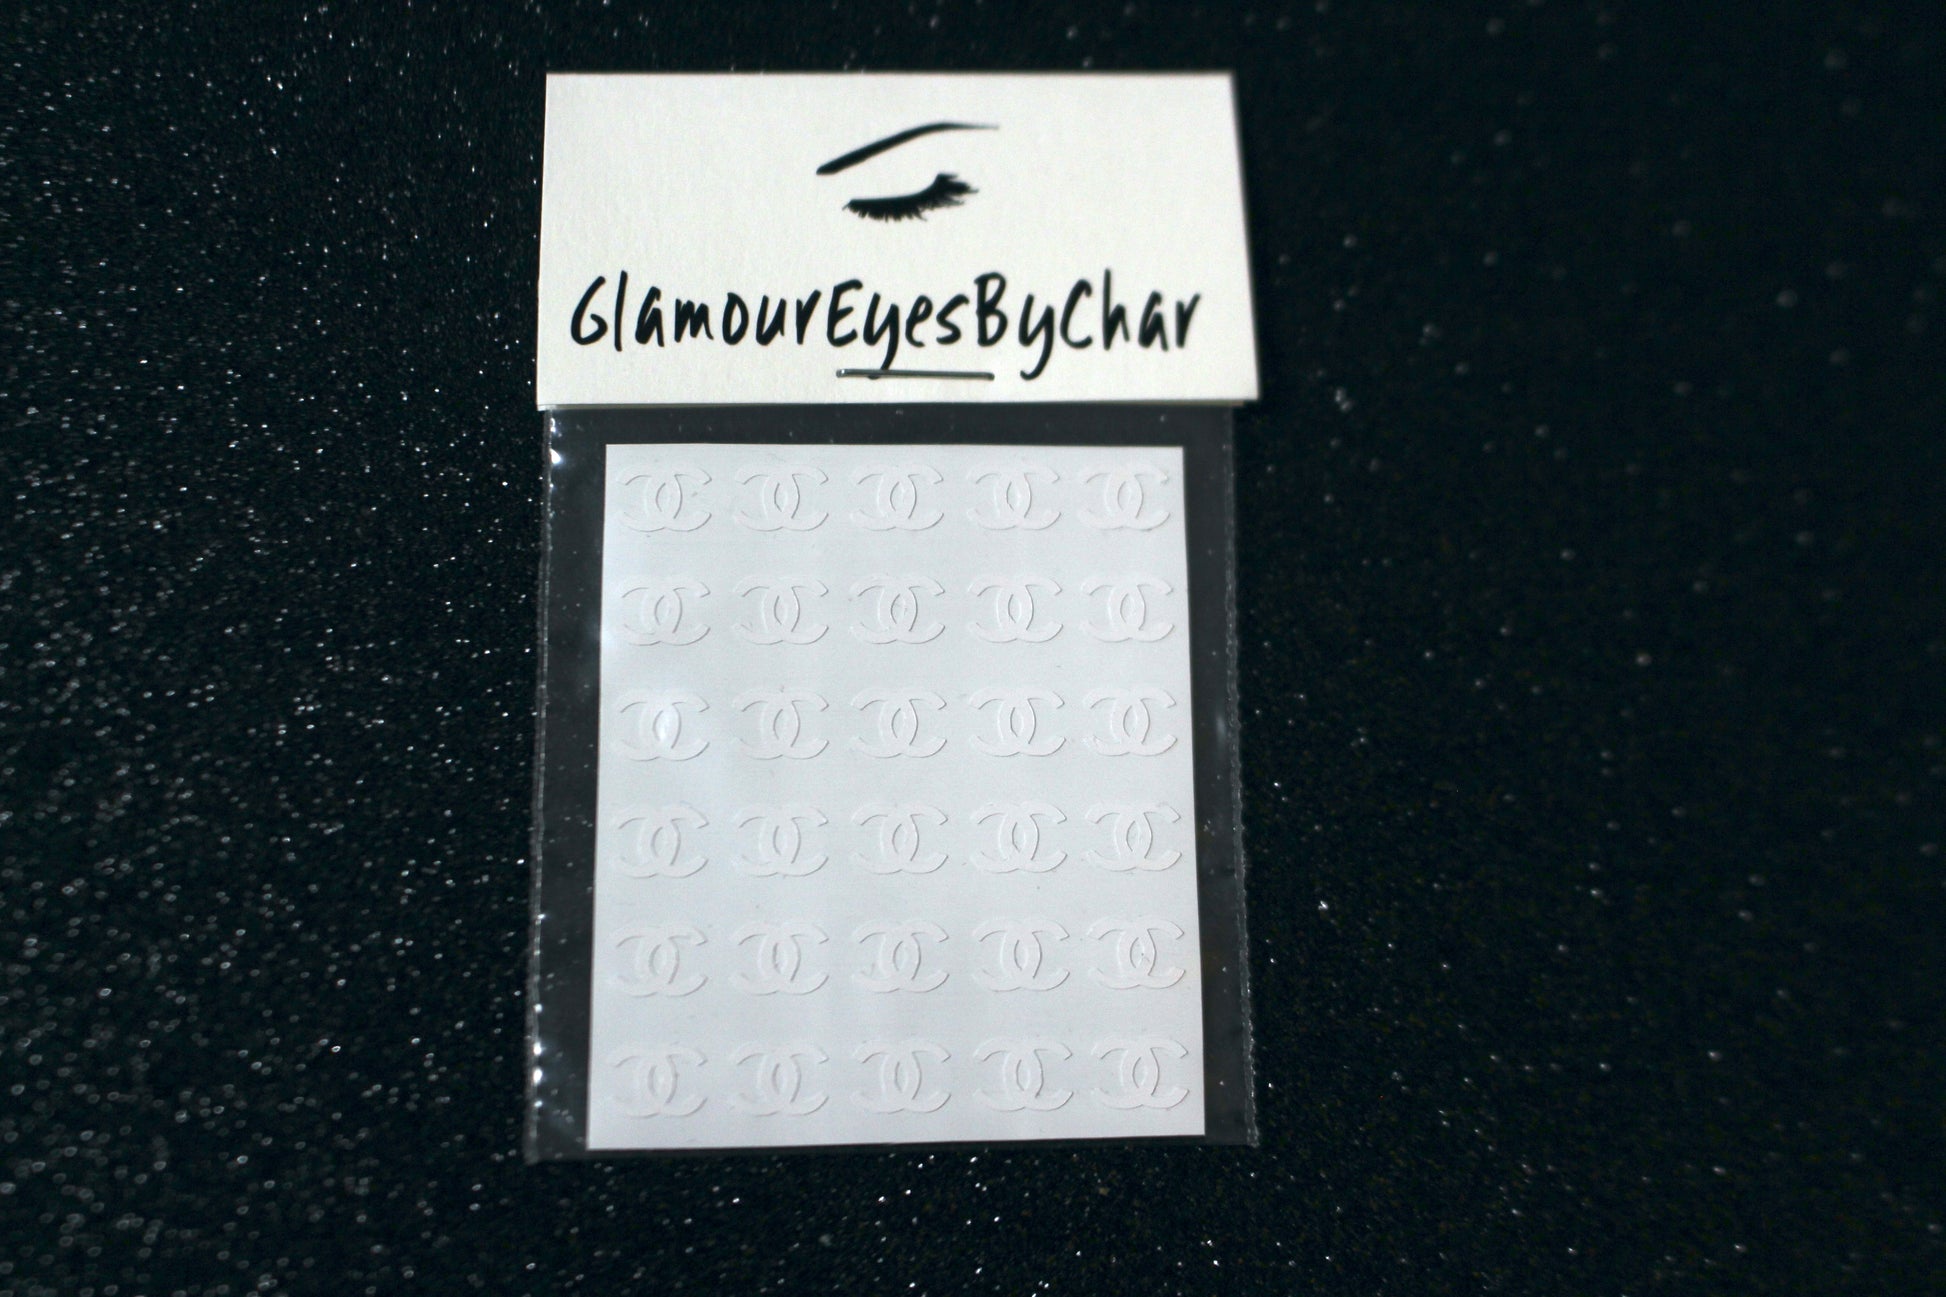 No need to go to the nail salon. Spice up your nails at home with these unique Chanel designer inspired nail decals. They can be used on natural or acrylic nails. You can also easily apply them on top of regular or gel/shellac nail polish. These handmade decals can also be used for body art or any DIY project. Each pack contains 30 decals and is available in 4 different colours.